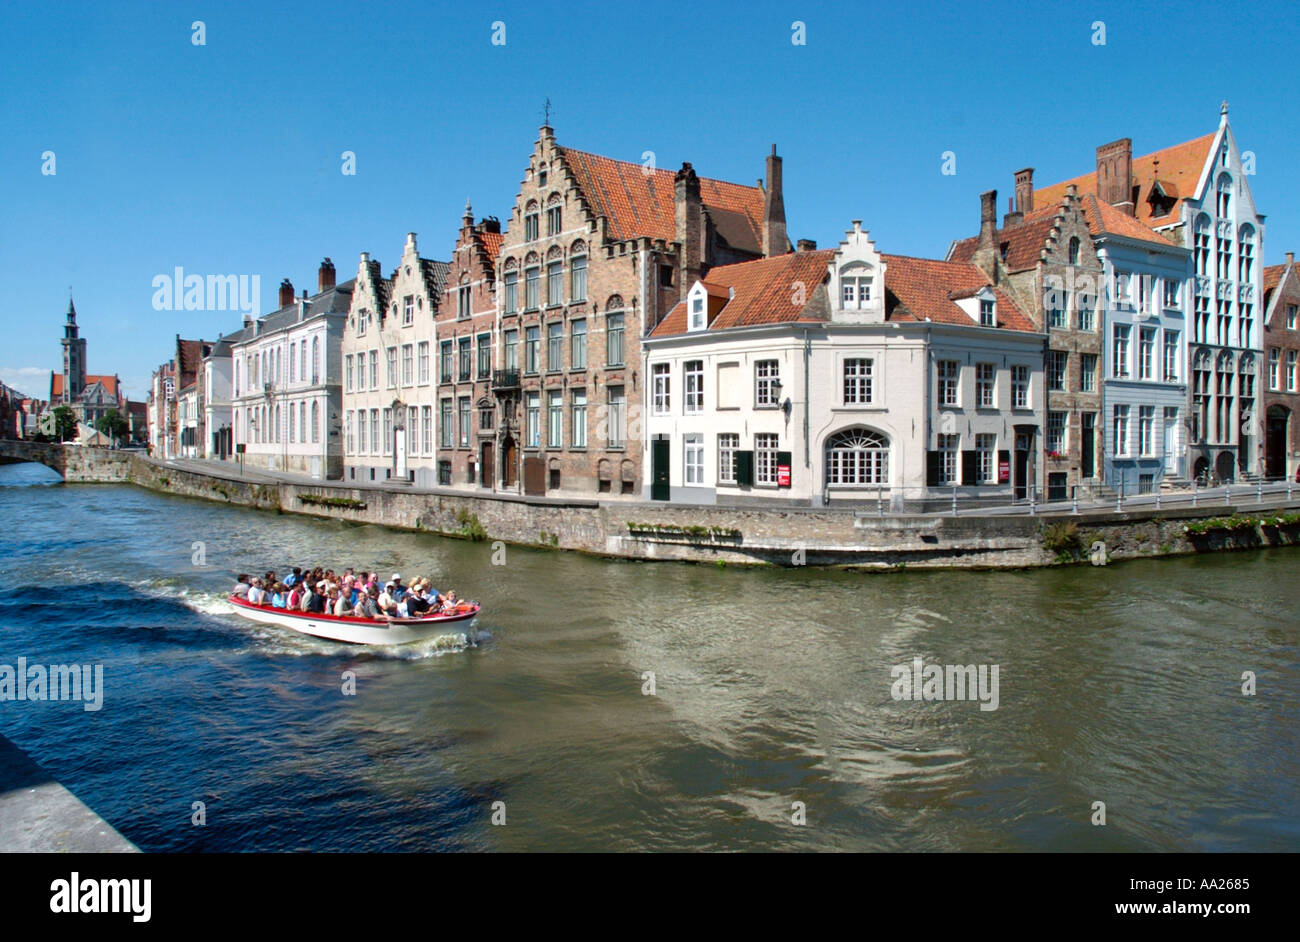 Boat trip on a canal in the old city centre, Bruges, Belgium Stock Photo